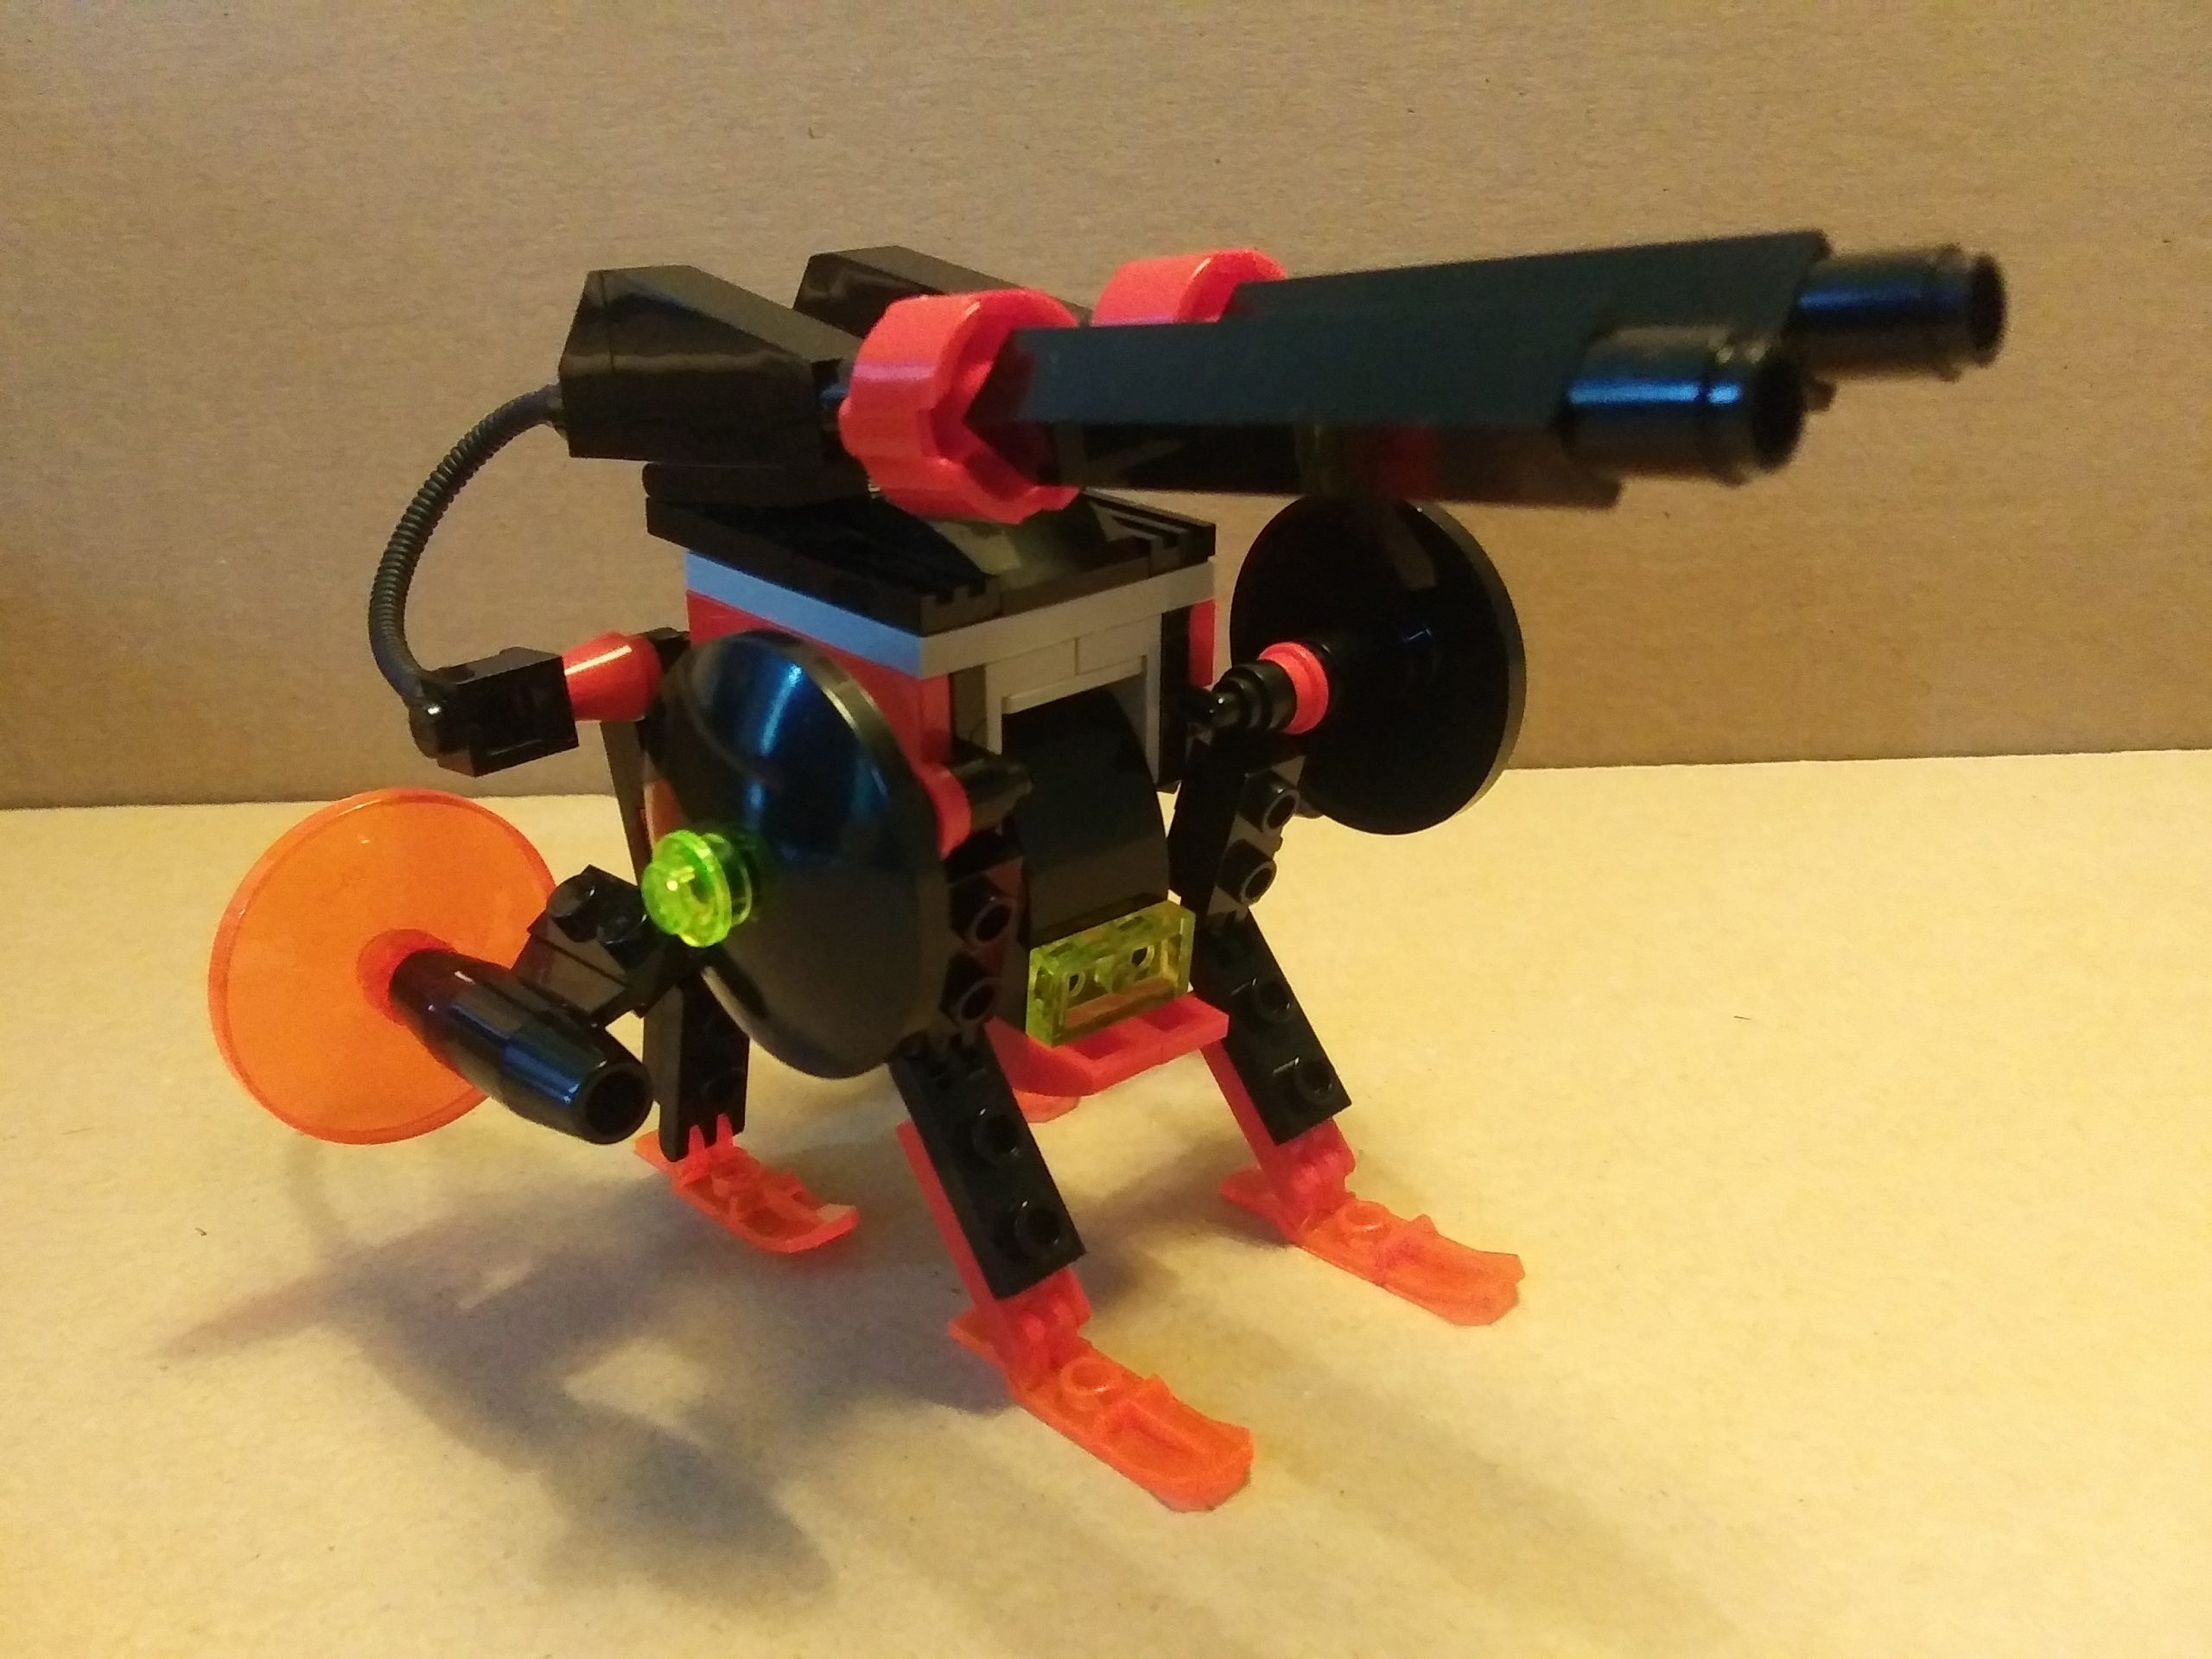 Mobile Frame Zero Lego mecha model, Underbite, equipped with twin-linked Xarelto cannon, ventic field projector, and scoot jets